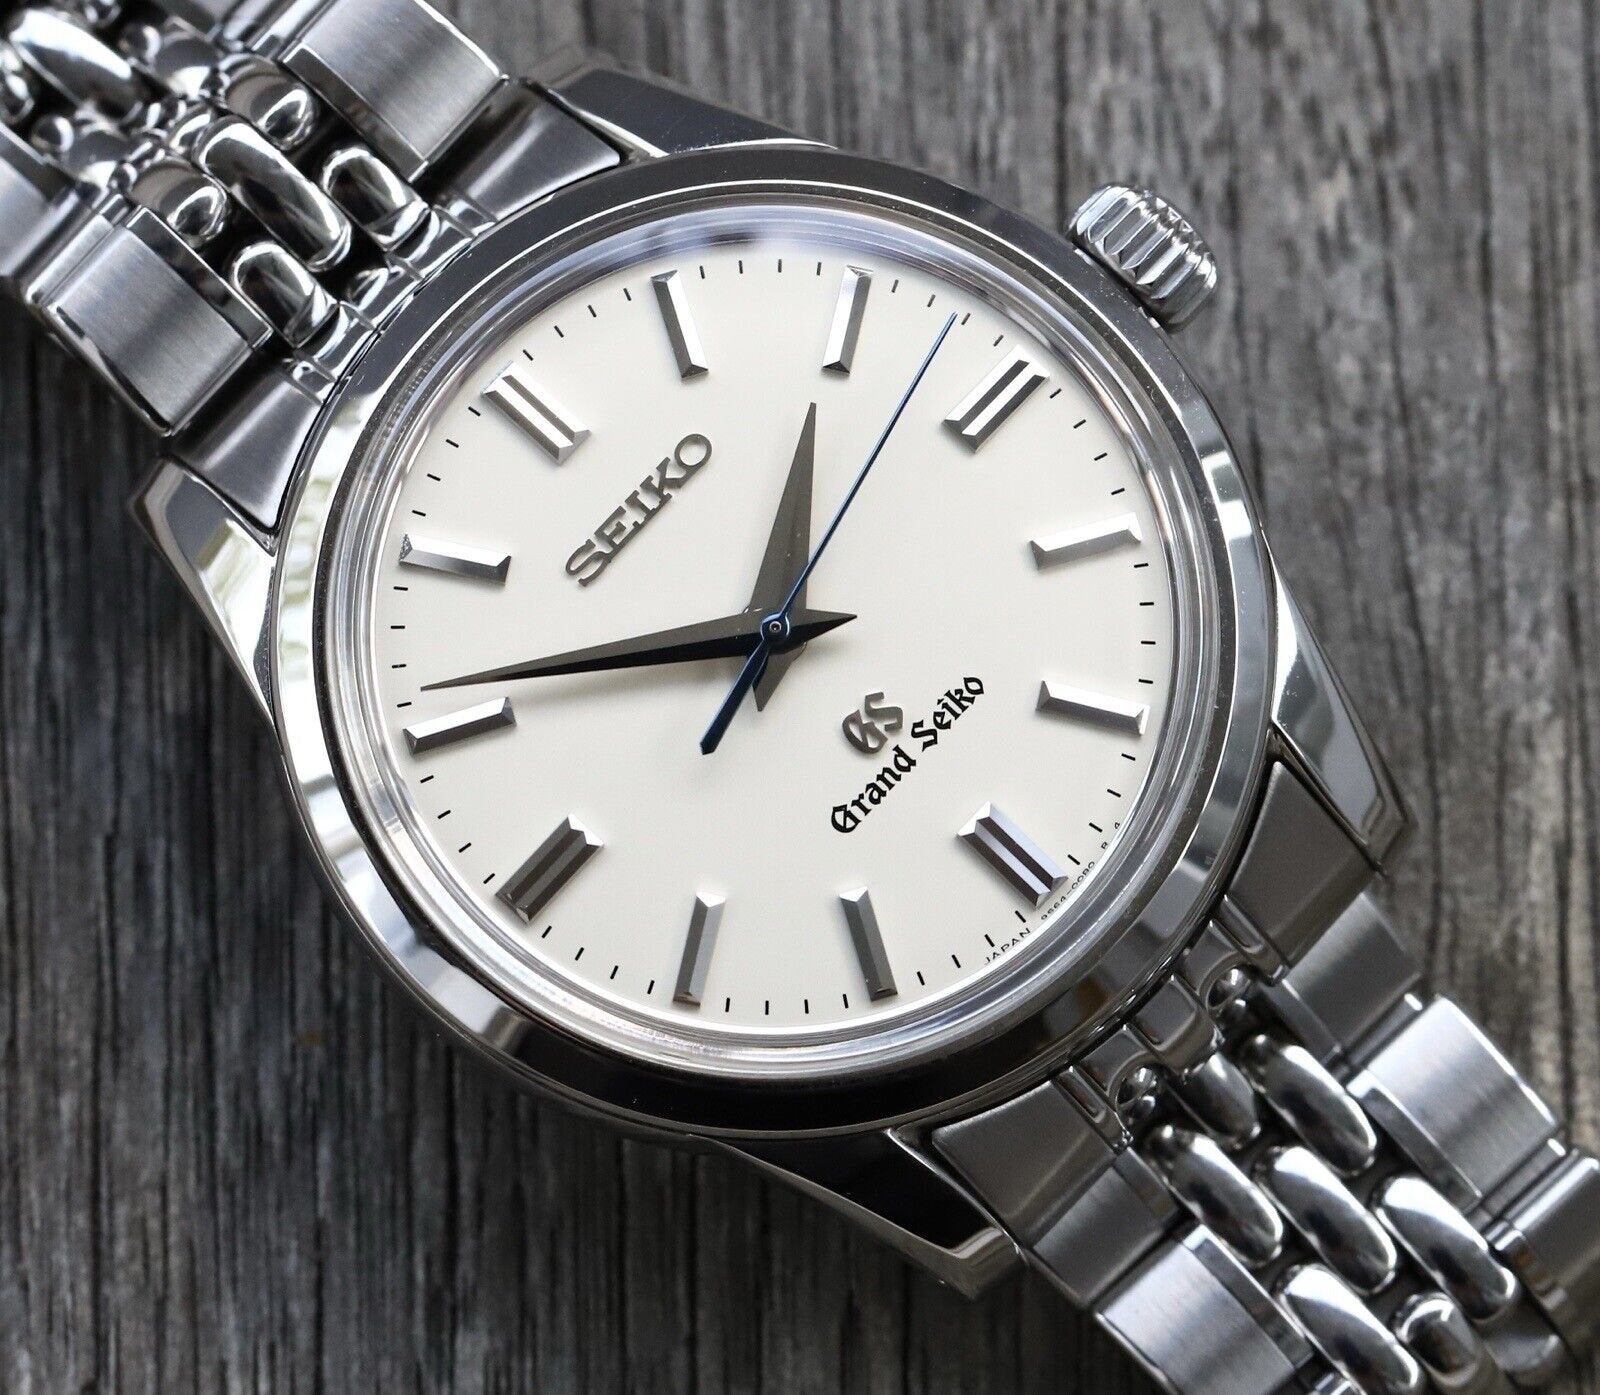 Grand_Seiko_SBGW031_Boutique-only_edition_on_Bracelet_Watch_Vault_02.jpg